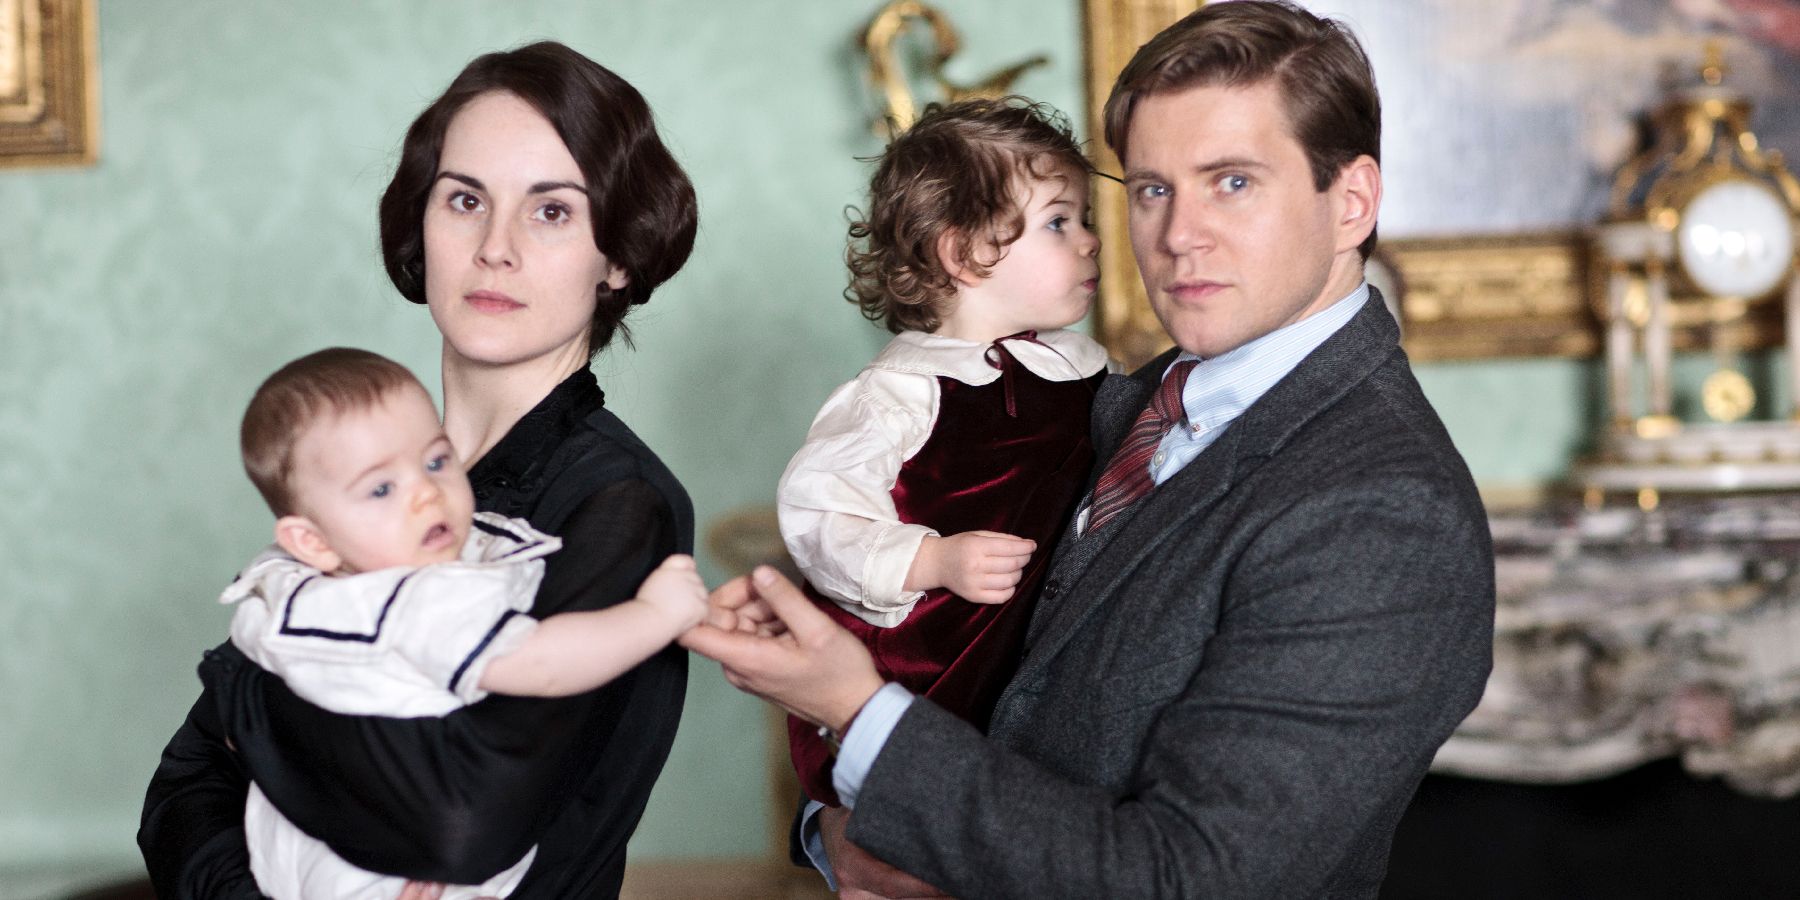 Mary and Tom hold their babies in Downton Abbey.